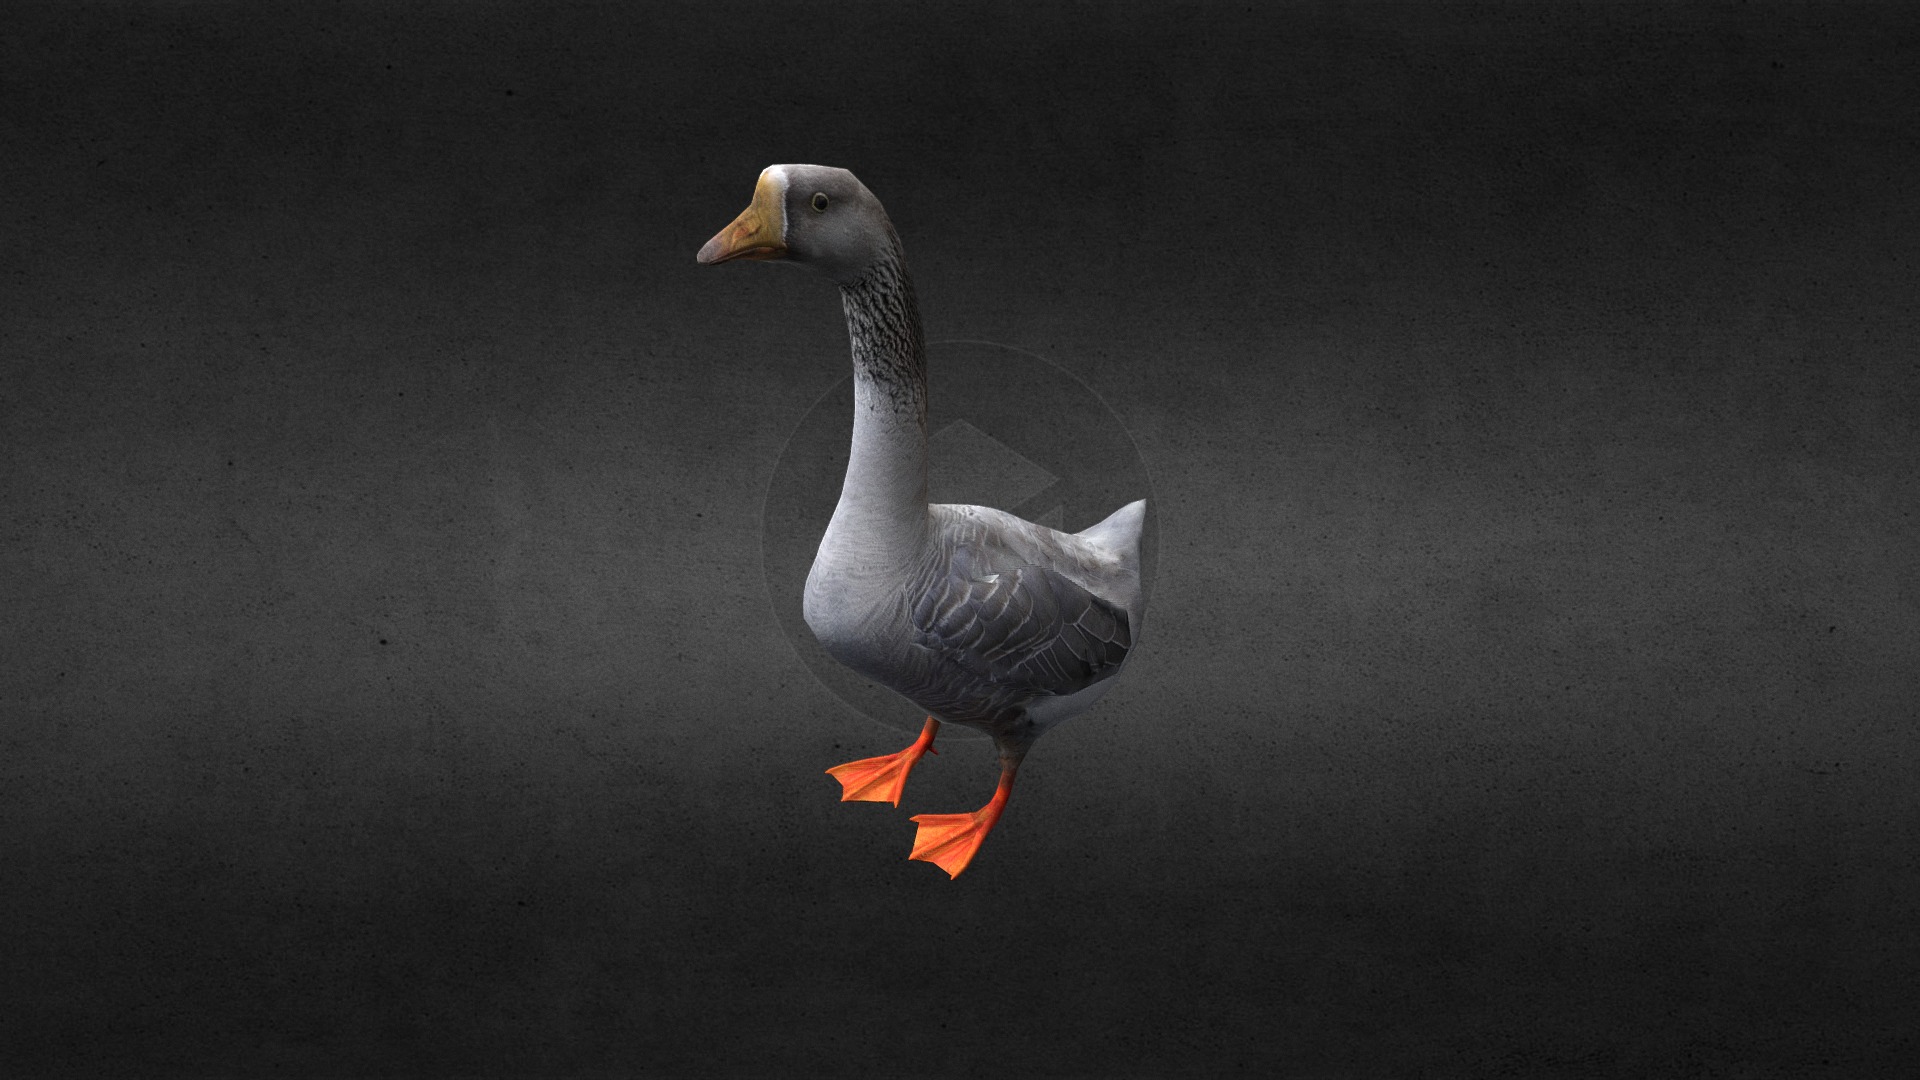 3D model Goose - This is a 3D model of the Goose. The 3D model is about a duck walking on pavement.